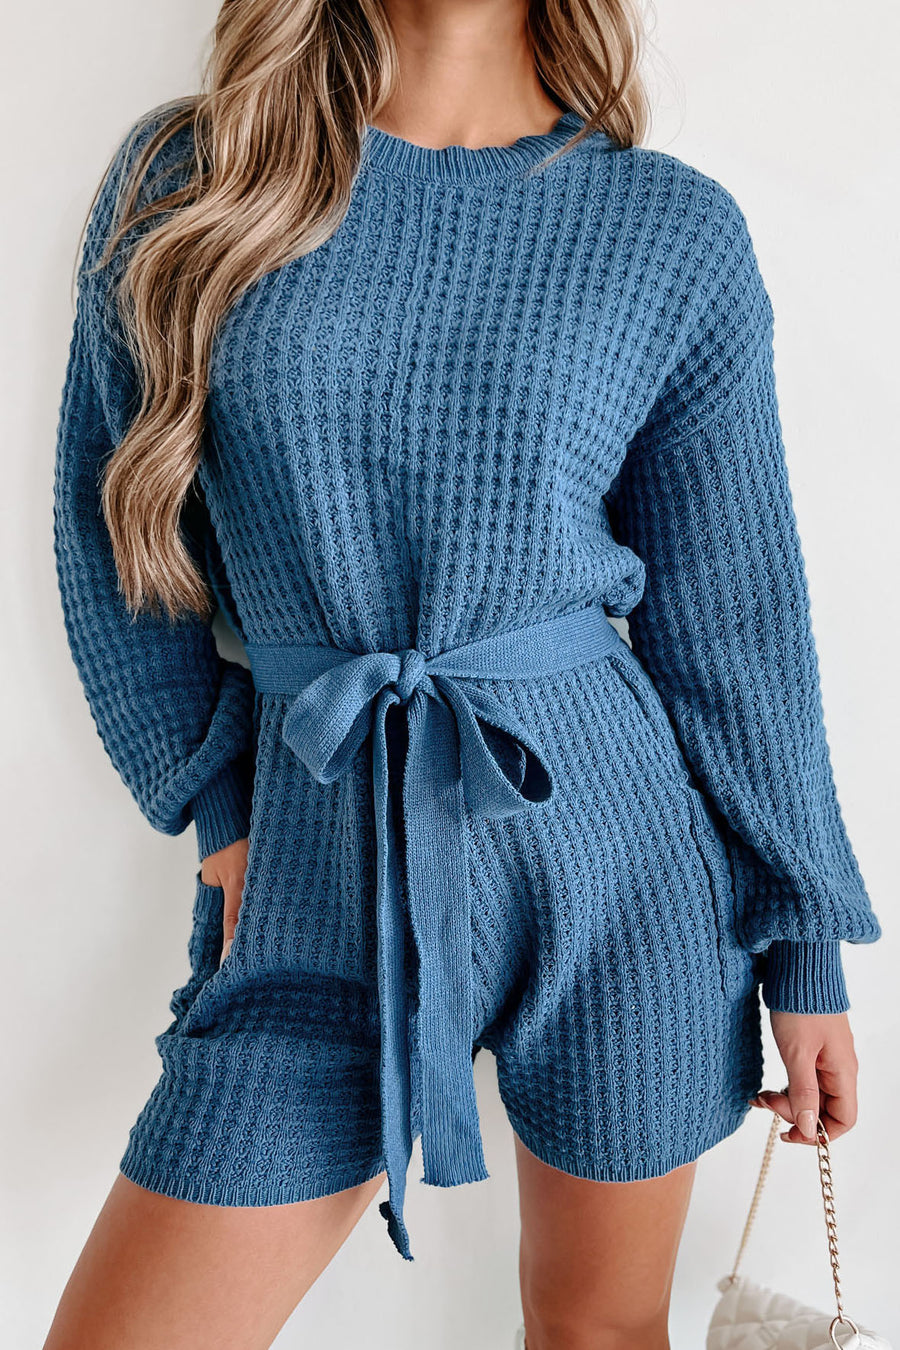 Putting My Troubles Aside Sweater Knit Romper (Navy) - NanaMacs